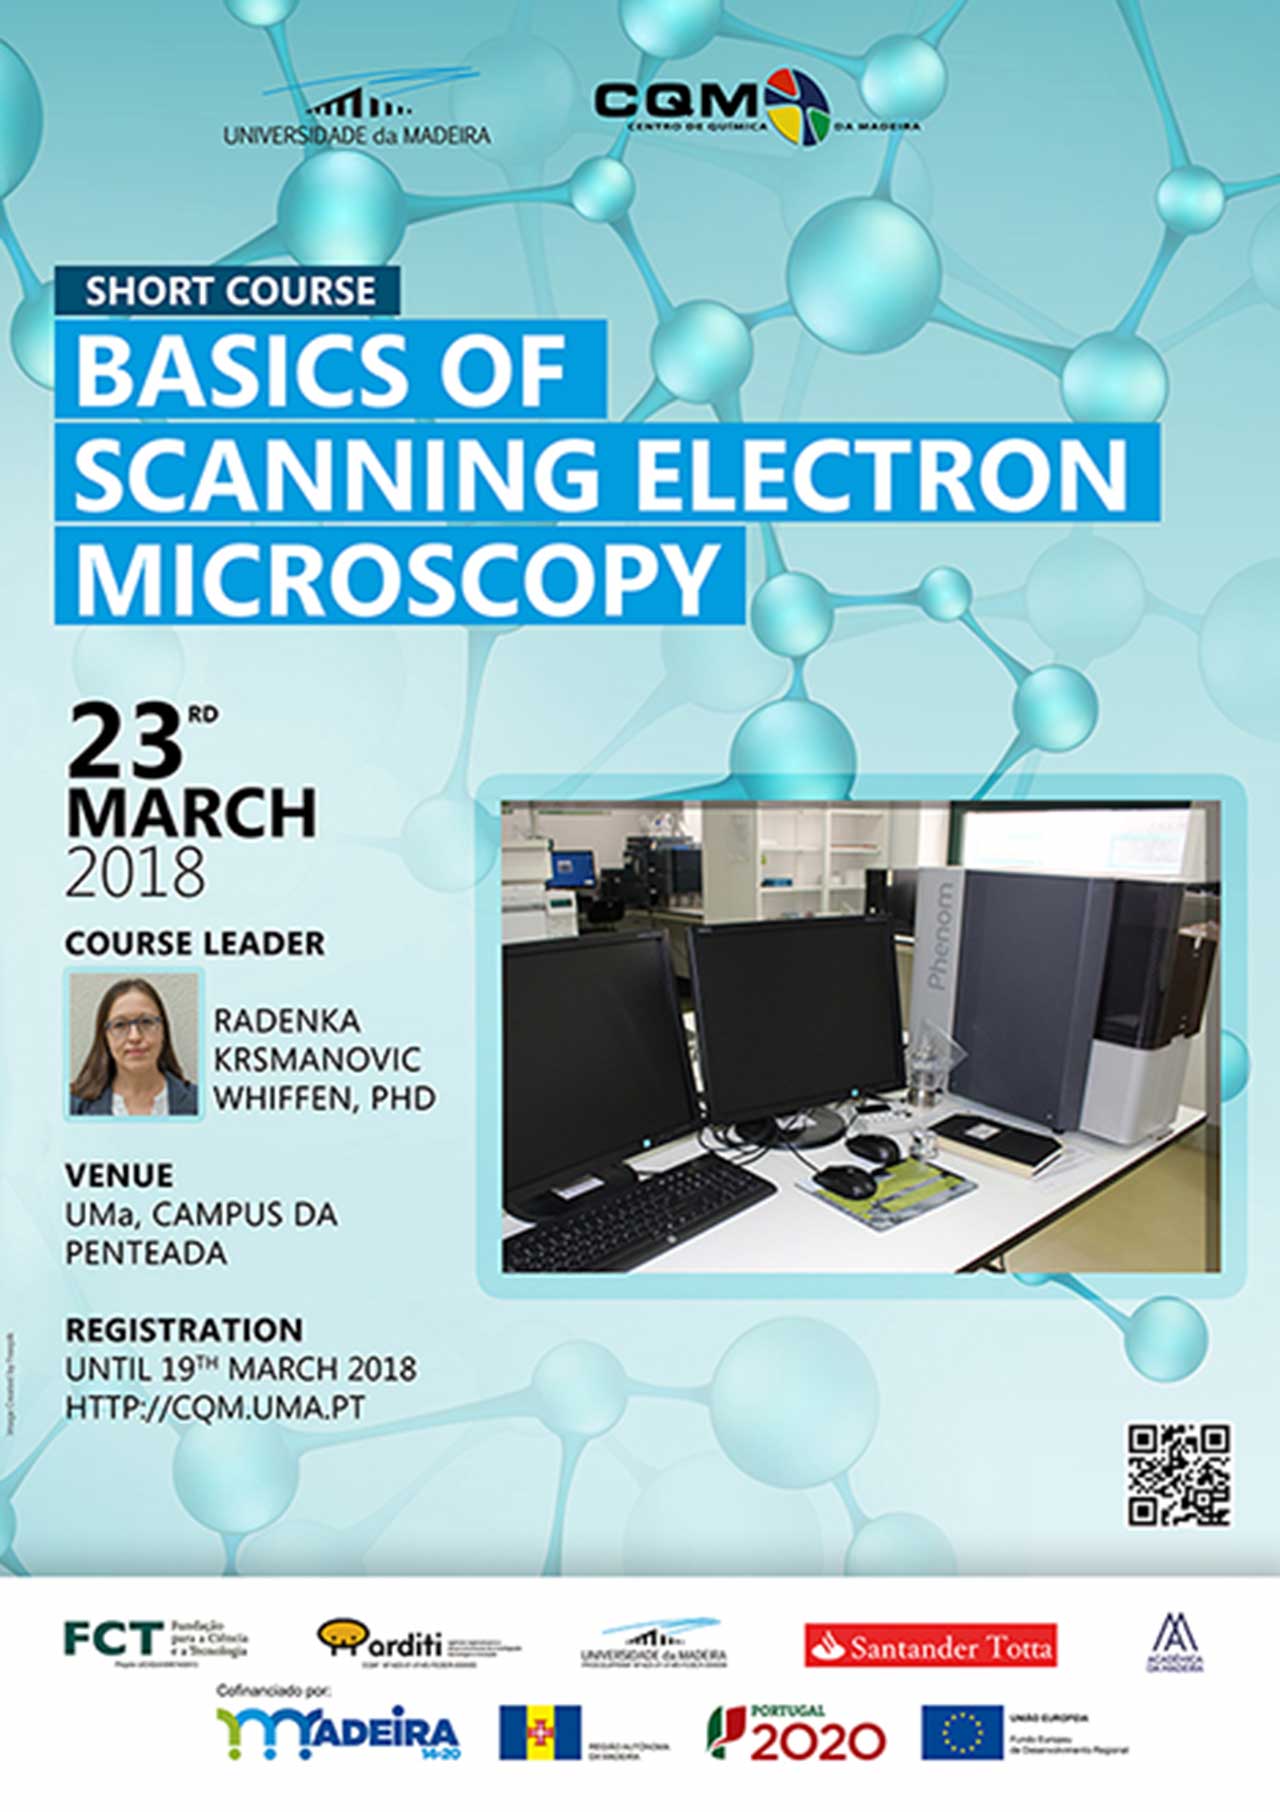  Basics of Scanning Electron Microscopy course poster.